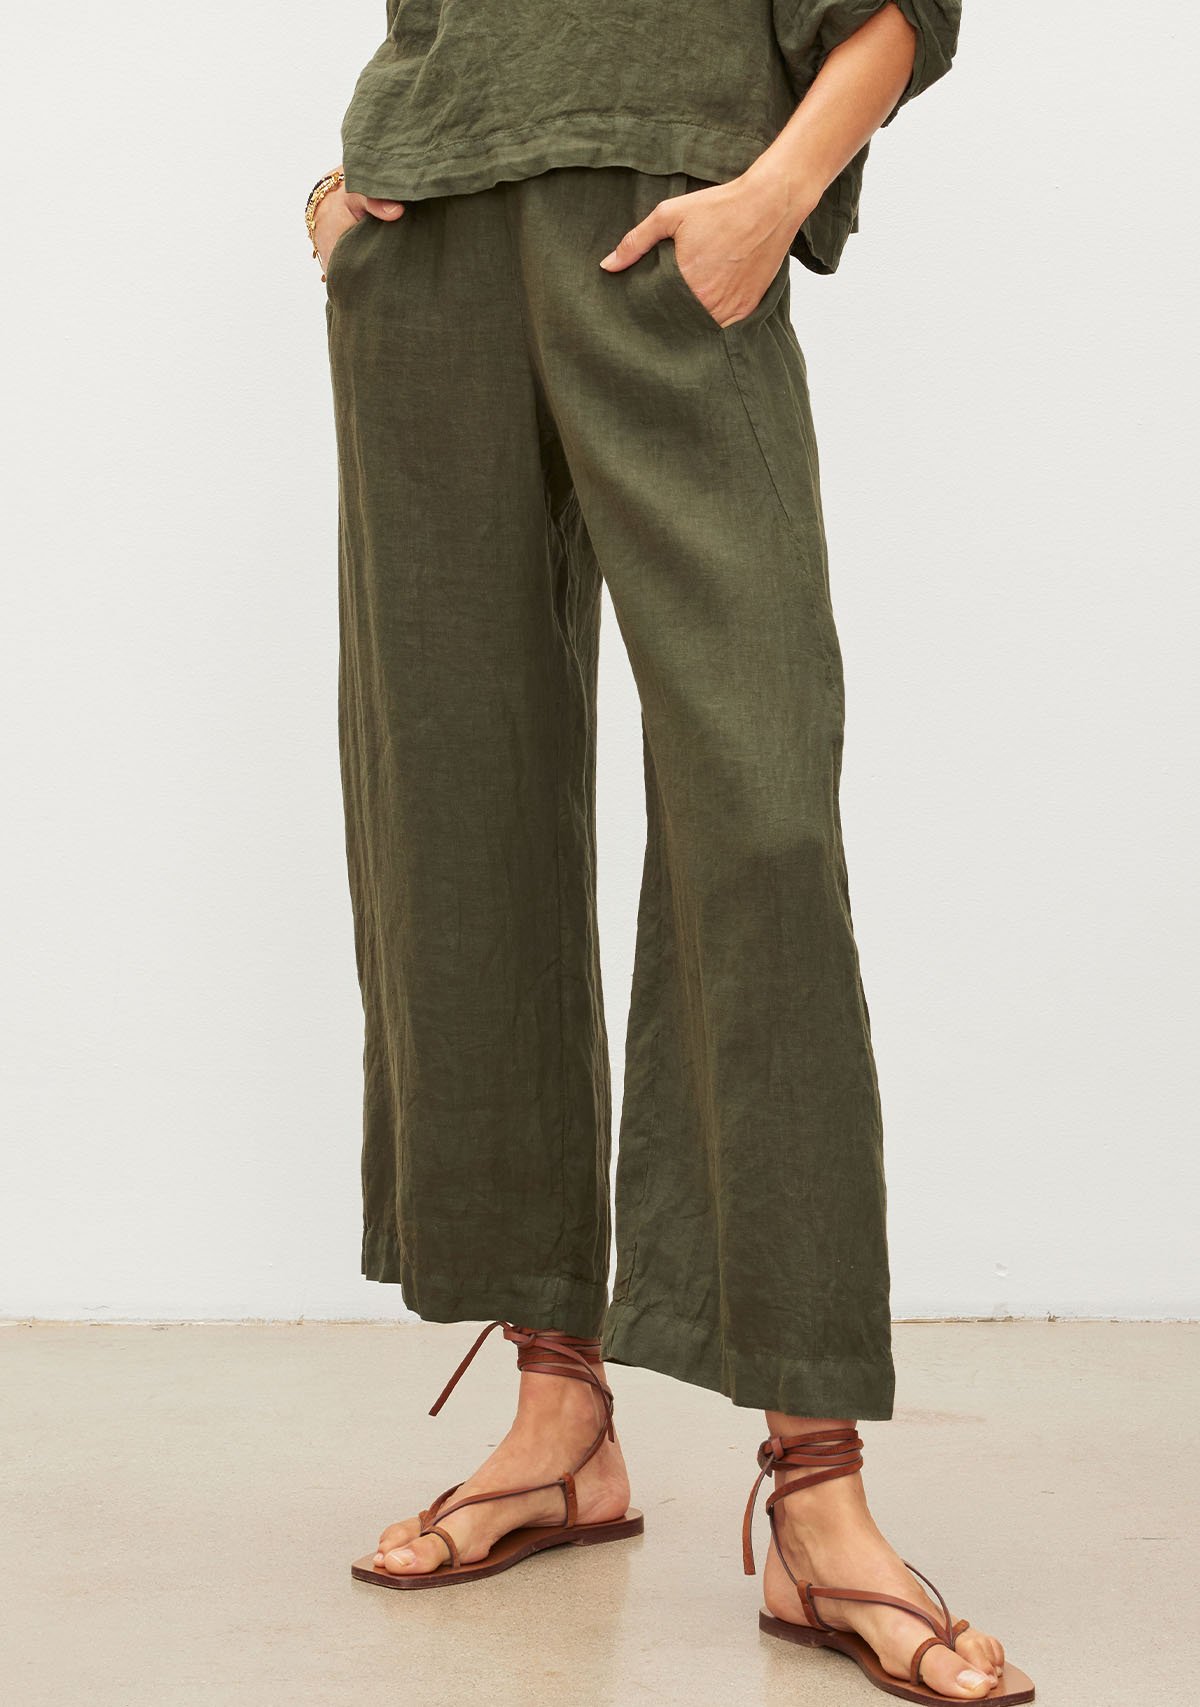 Model wearing the Lola Linen Pant in Tootsie